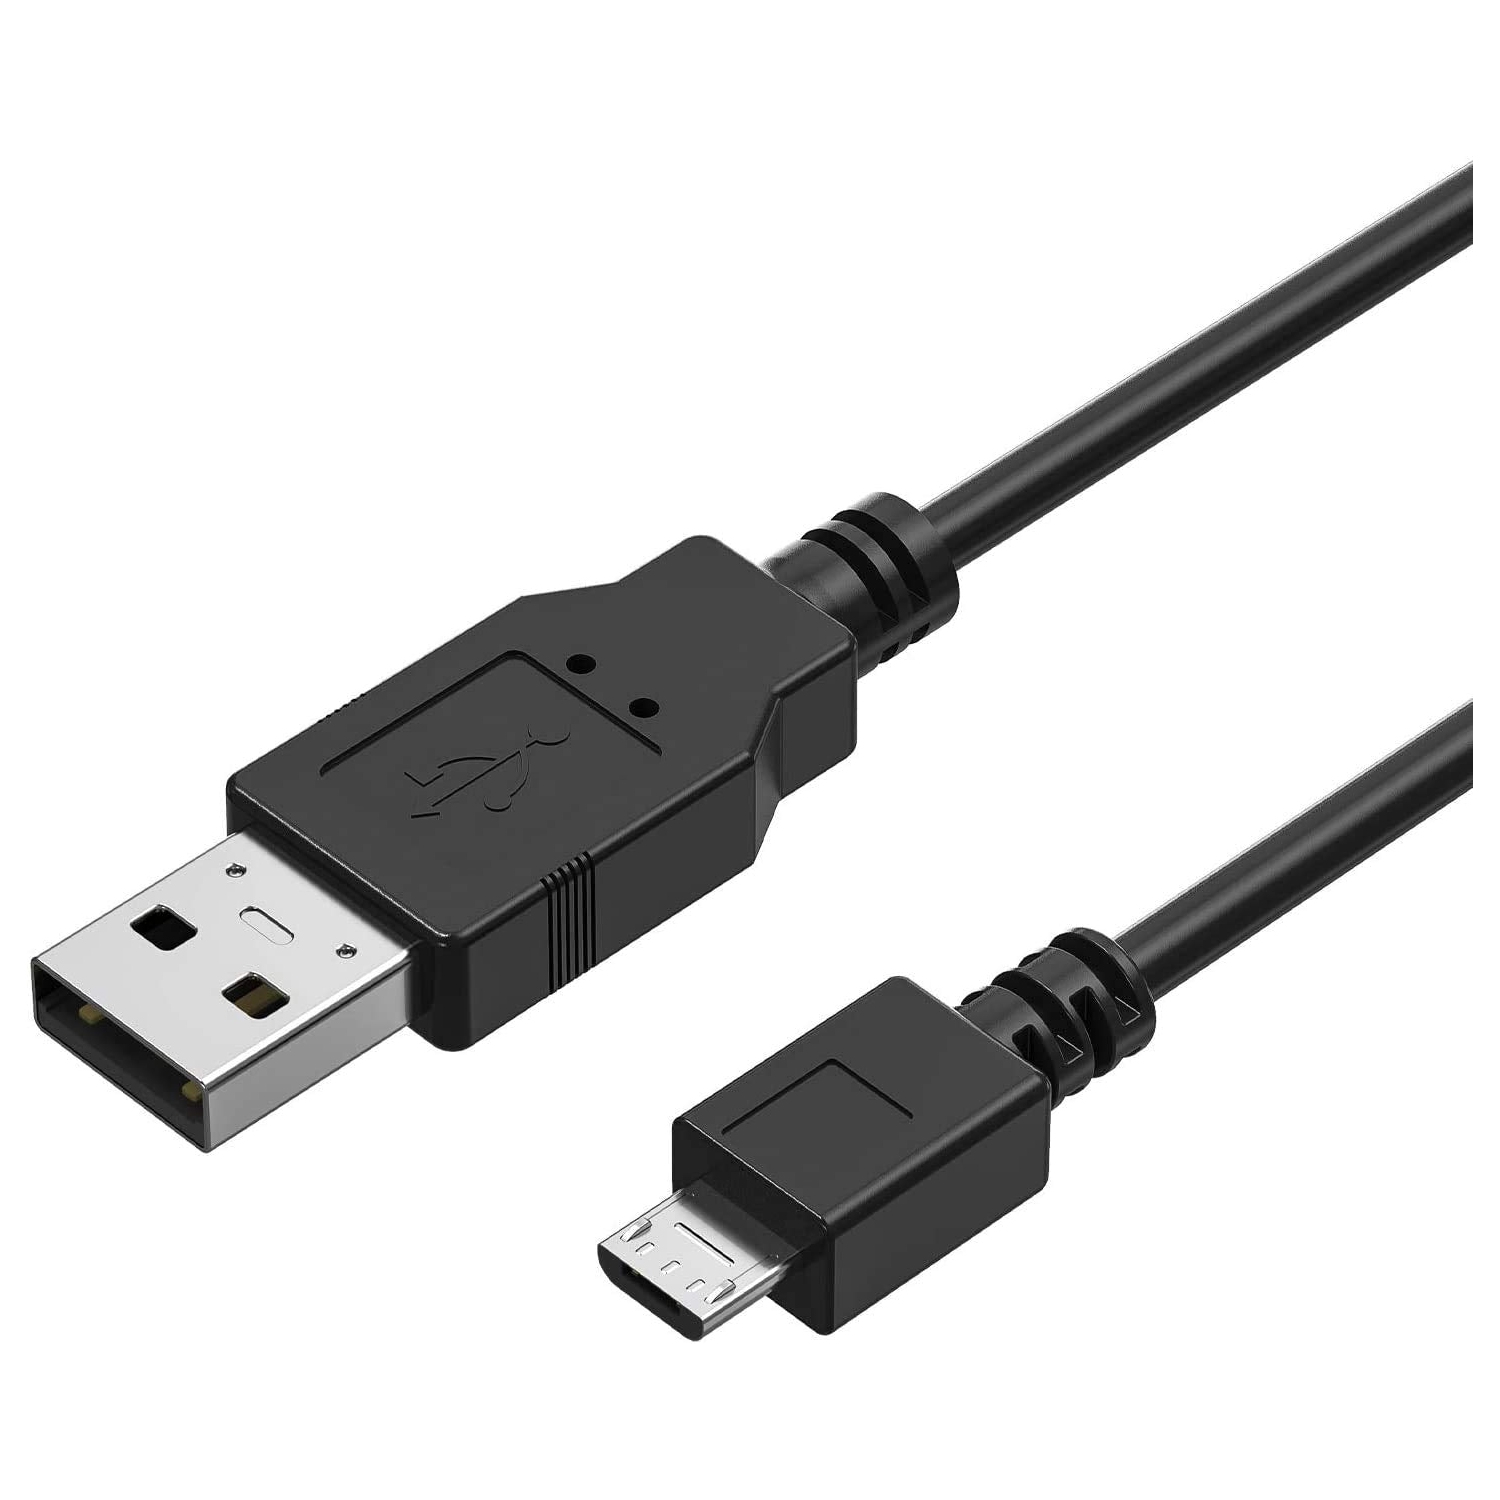 Micro USB Cable Cord for Roku Express, Roku Streaming Stick, Roku Premier, Replacement USB Power Cable Cord